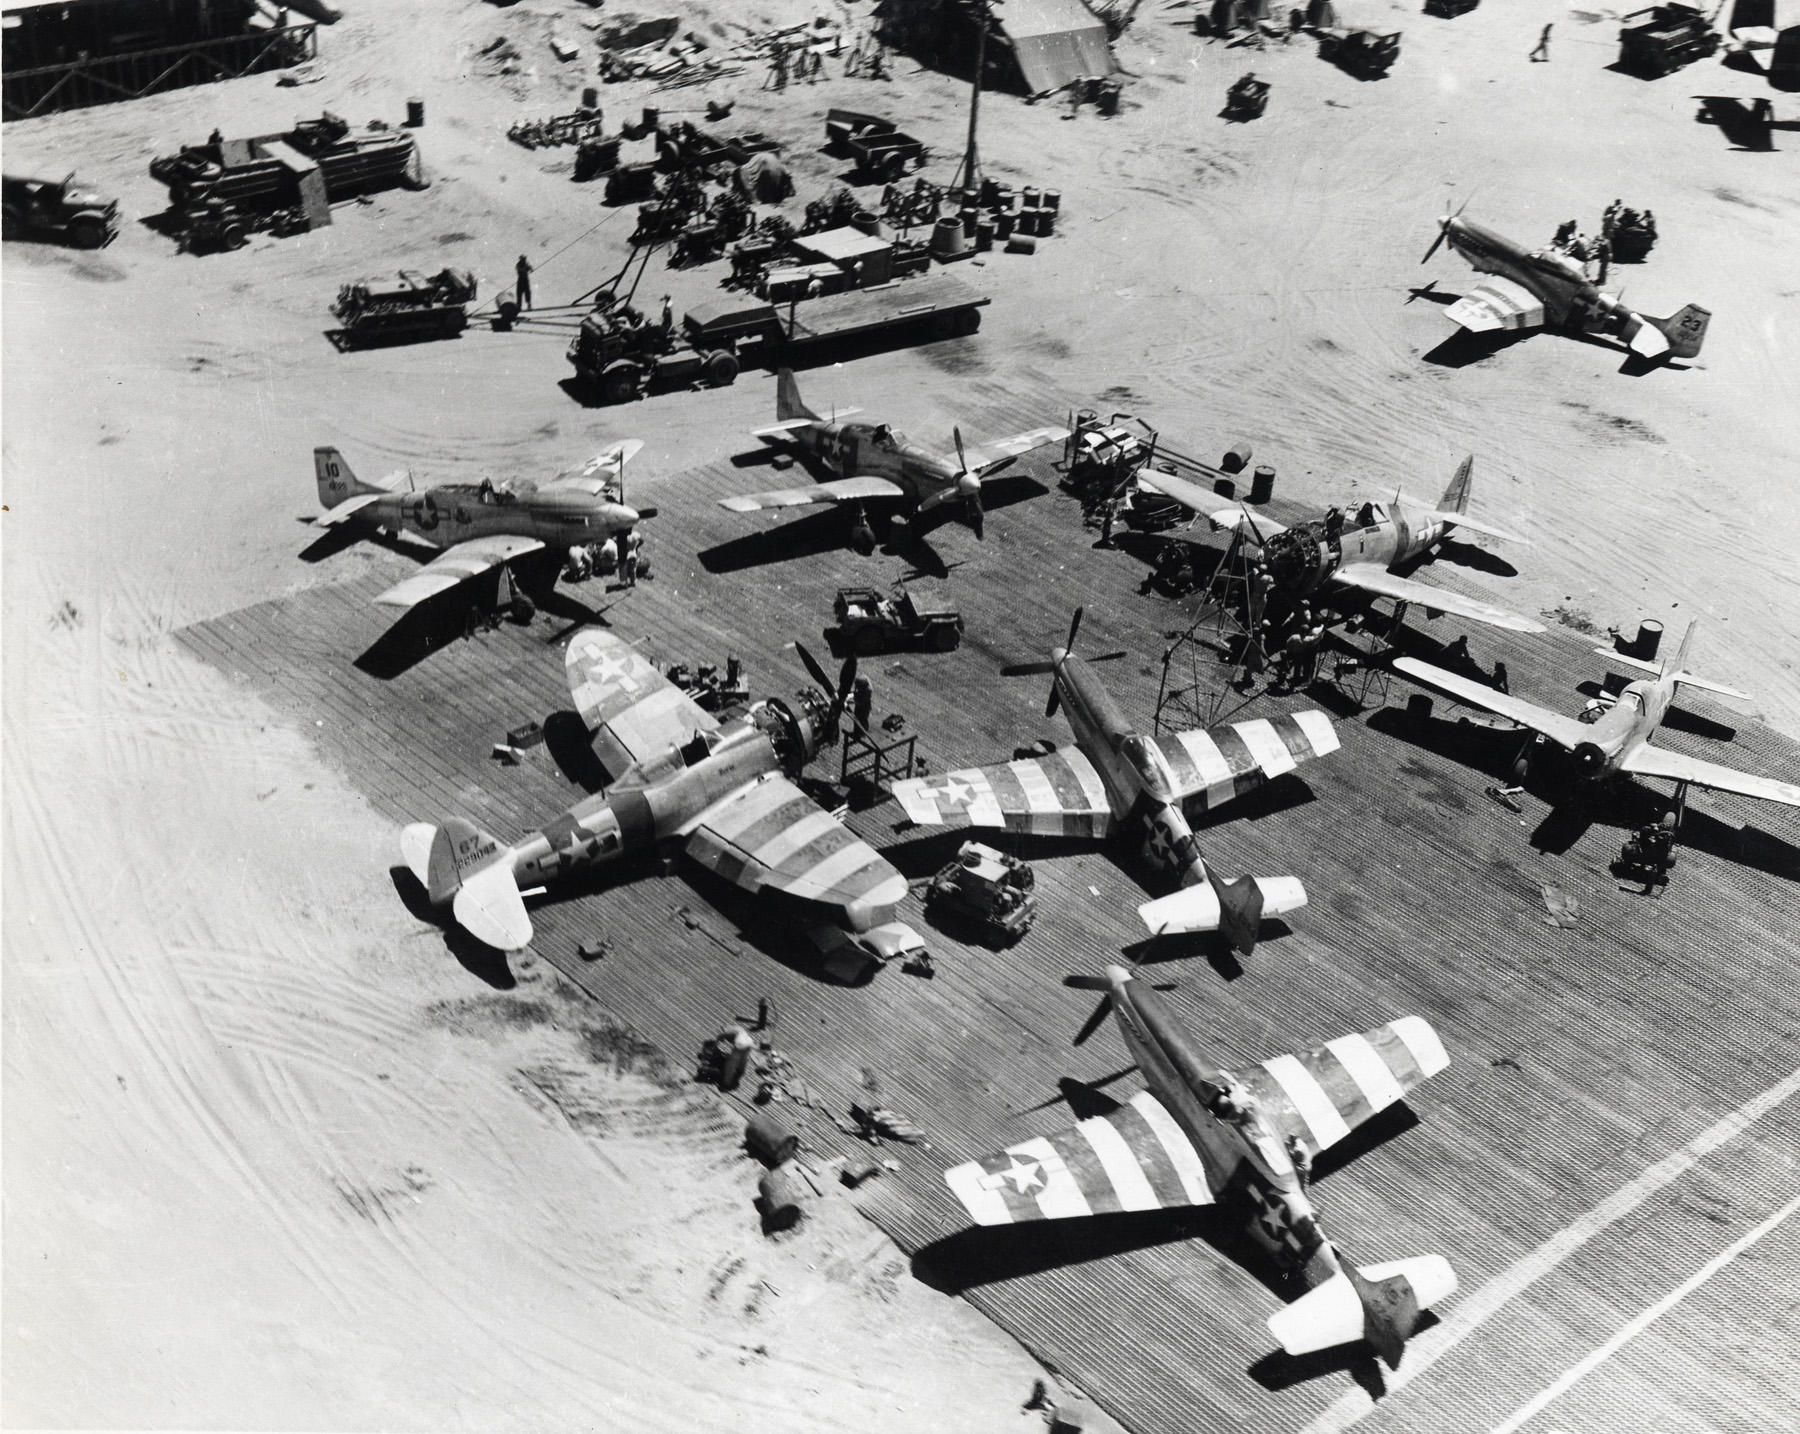 Maintenance area servicing P-51 Mustangs and one P-47 Thunderbolt of the 35th Fighter Group, Lingayen Airfield, Luzon, Philippines, Apr 1945